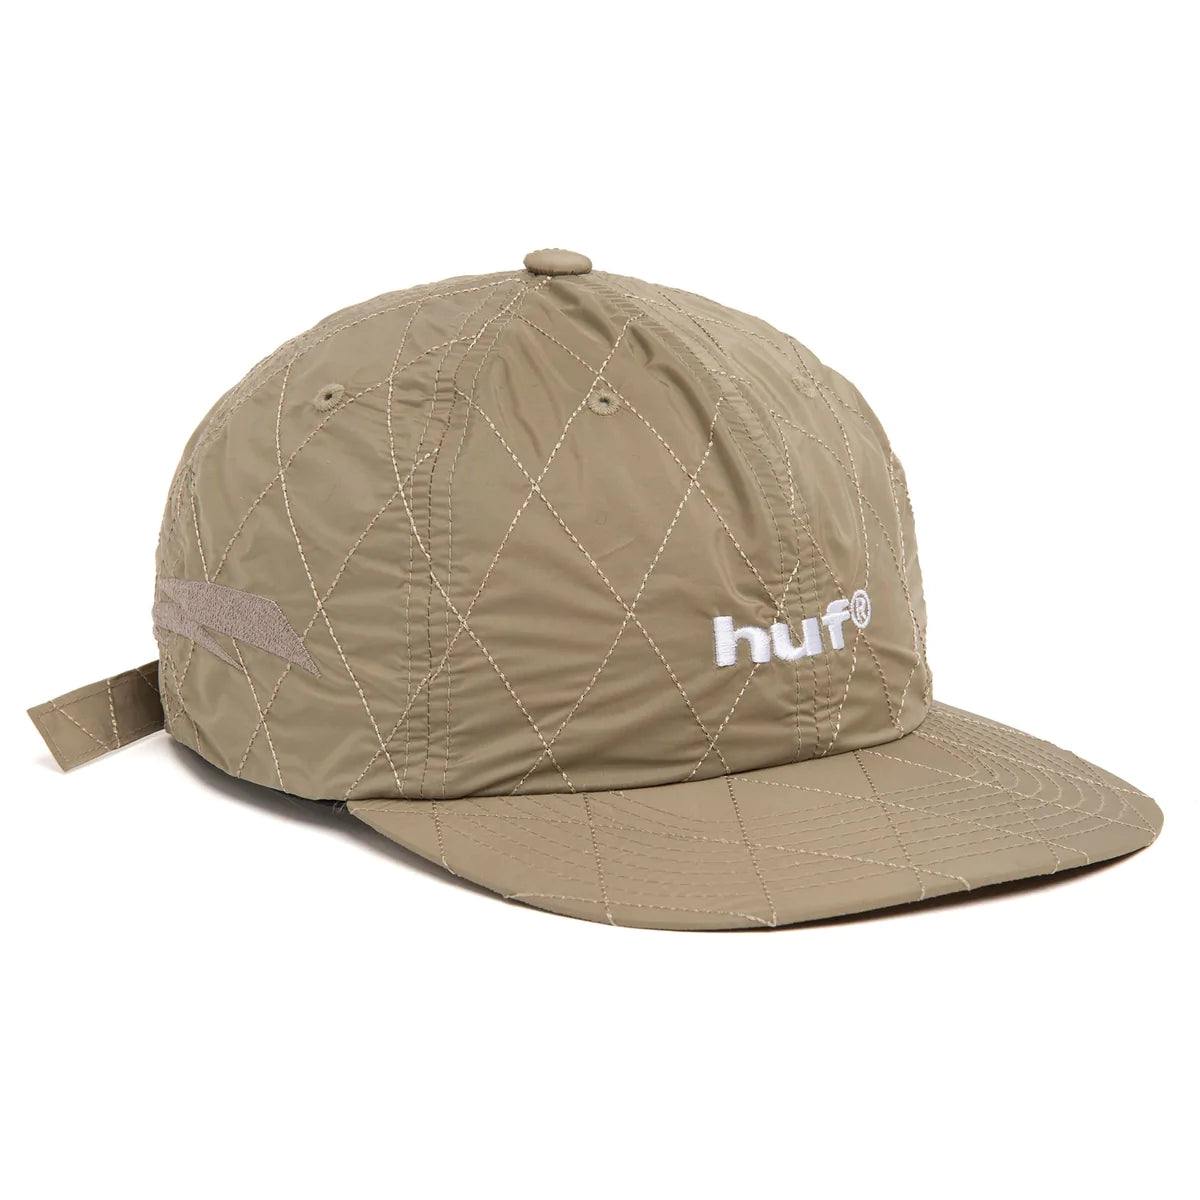 LIGHTINING QUILTED 6 PANEL HAT - TAN